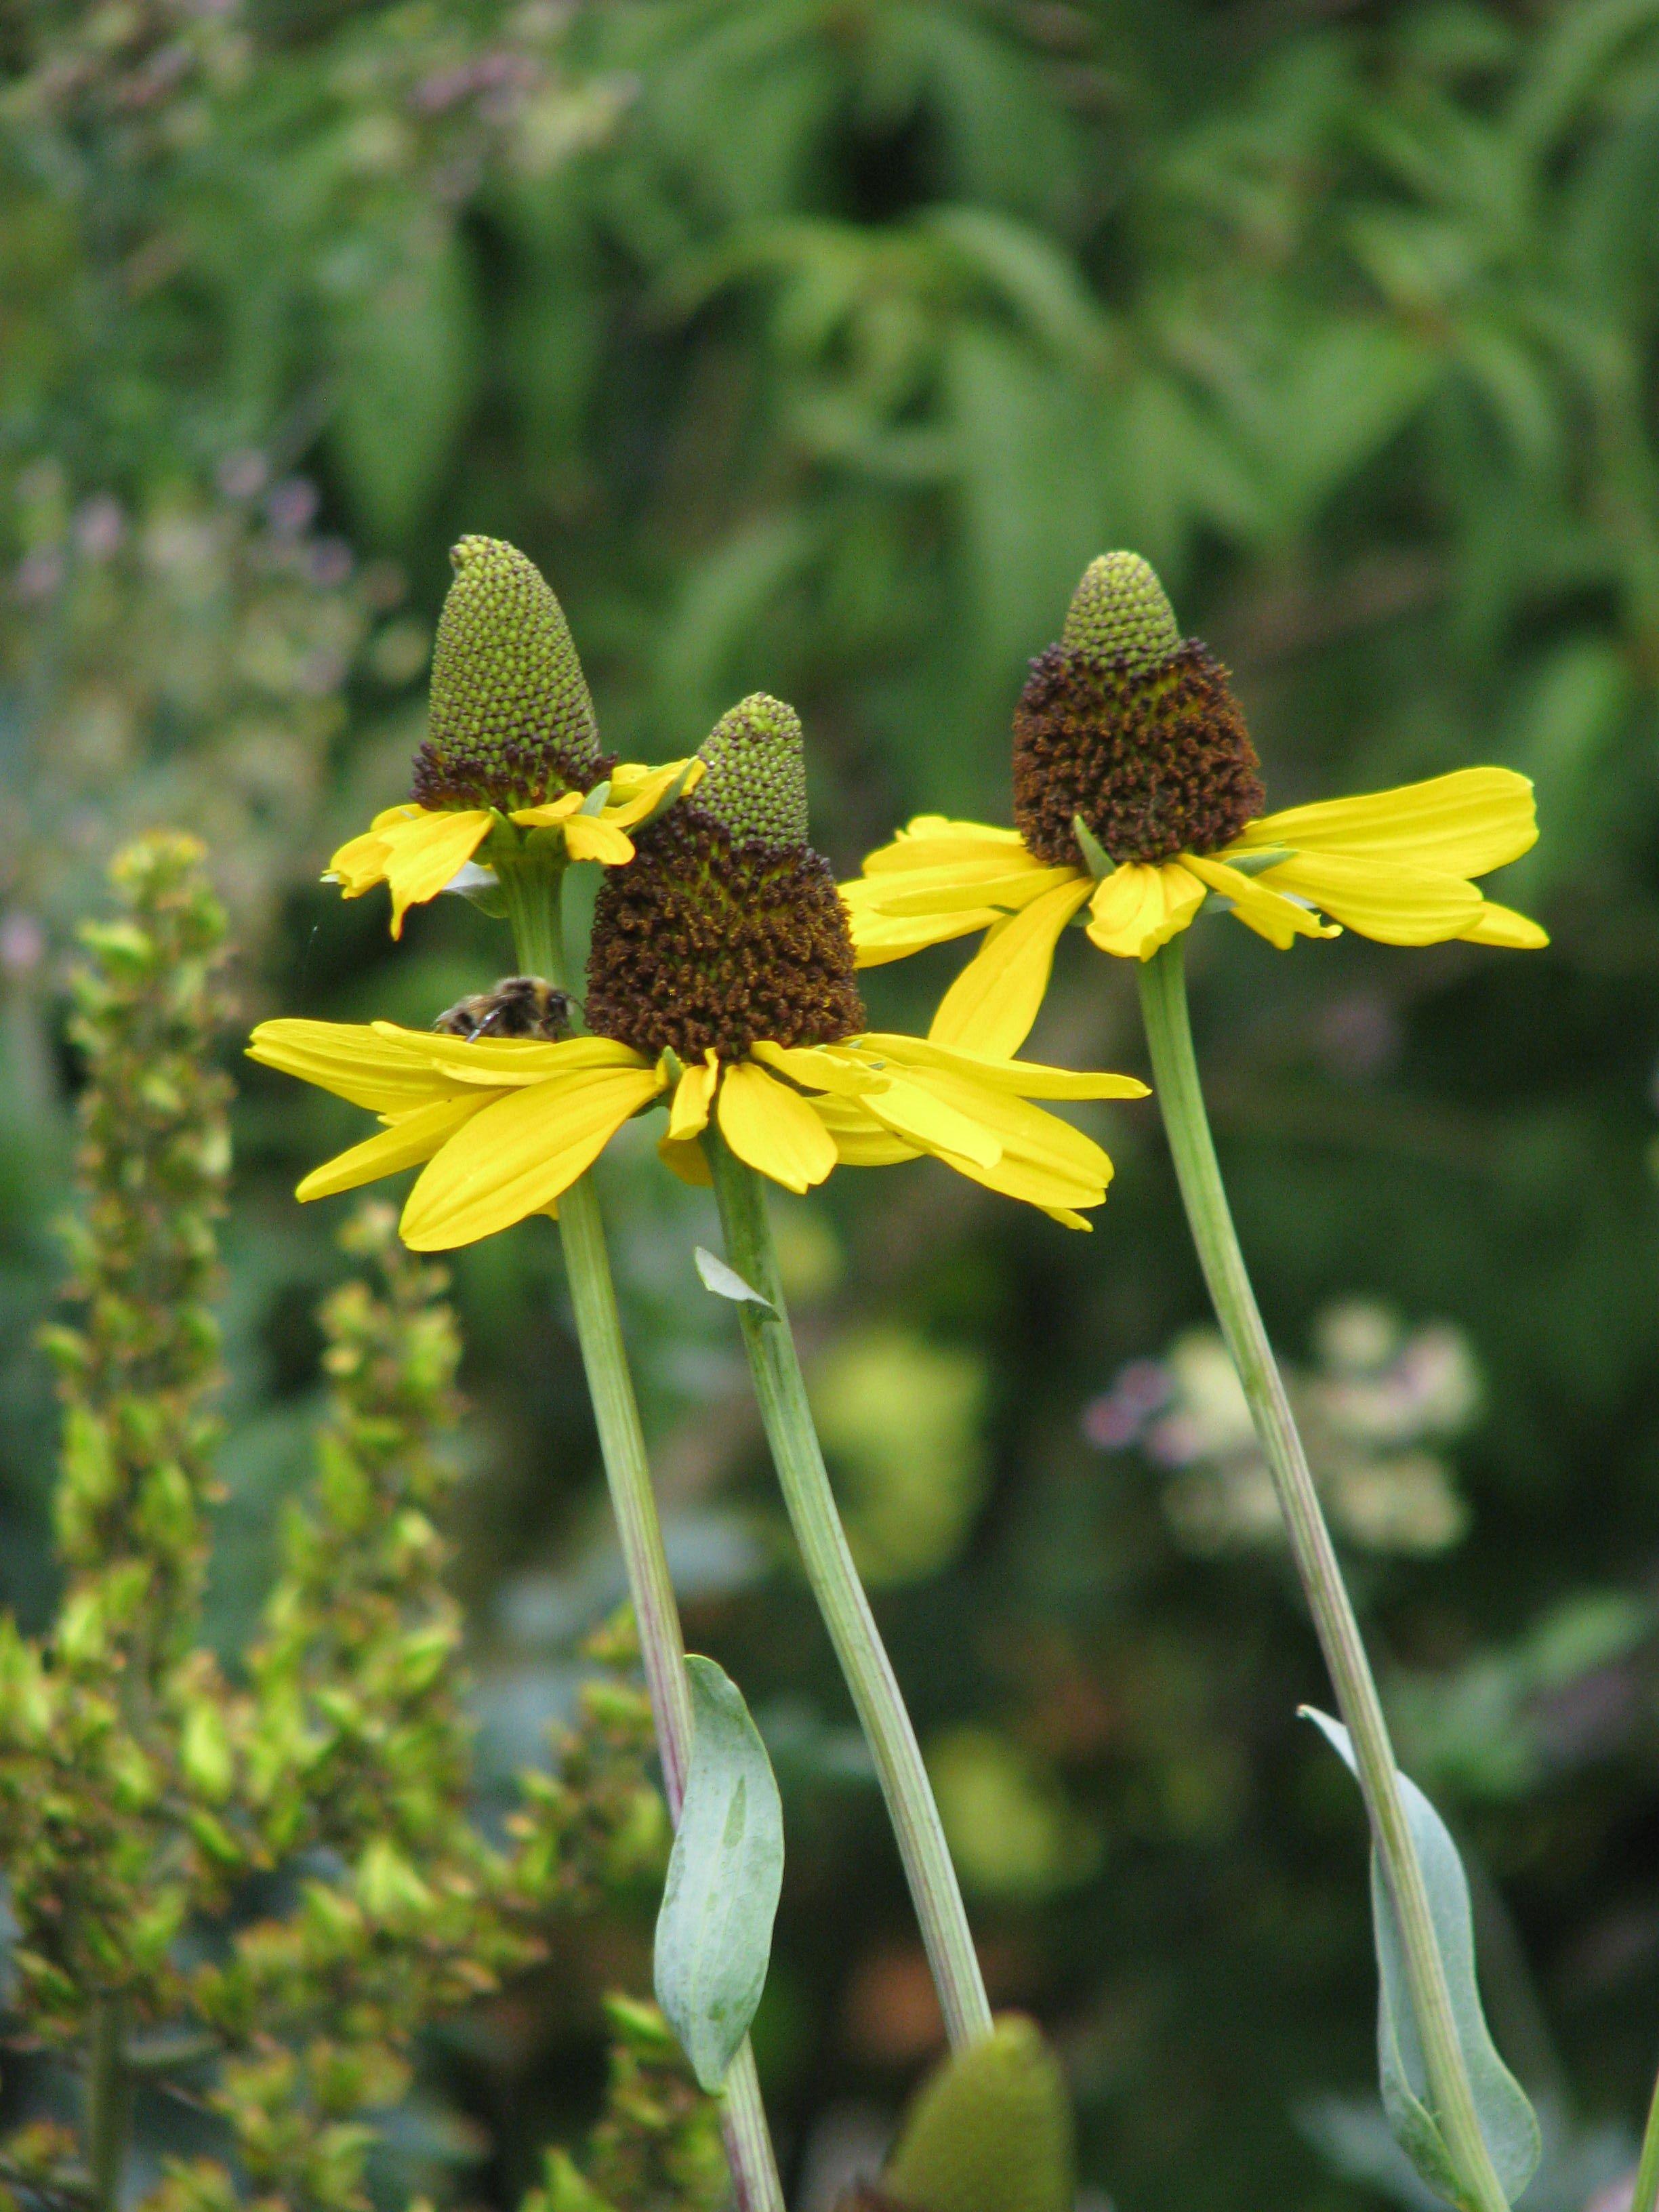 Yellow flower with dark-brown-green center, green sepal, stem and leaves.